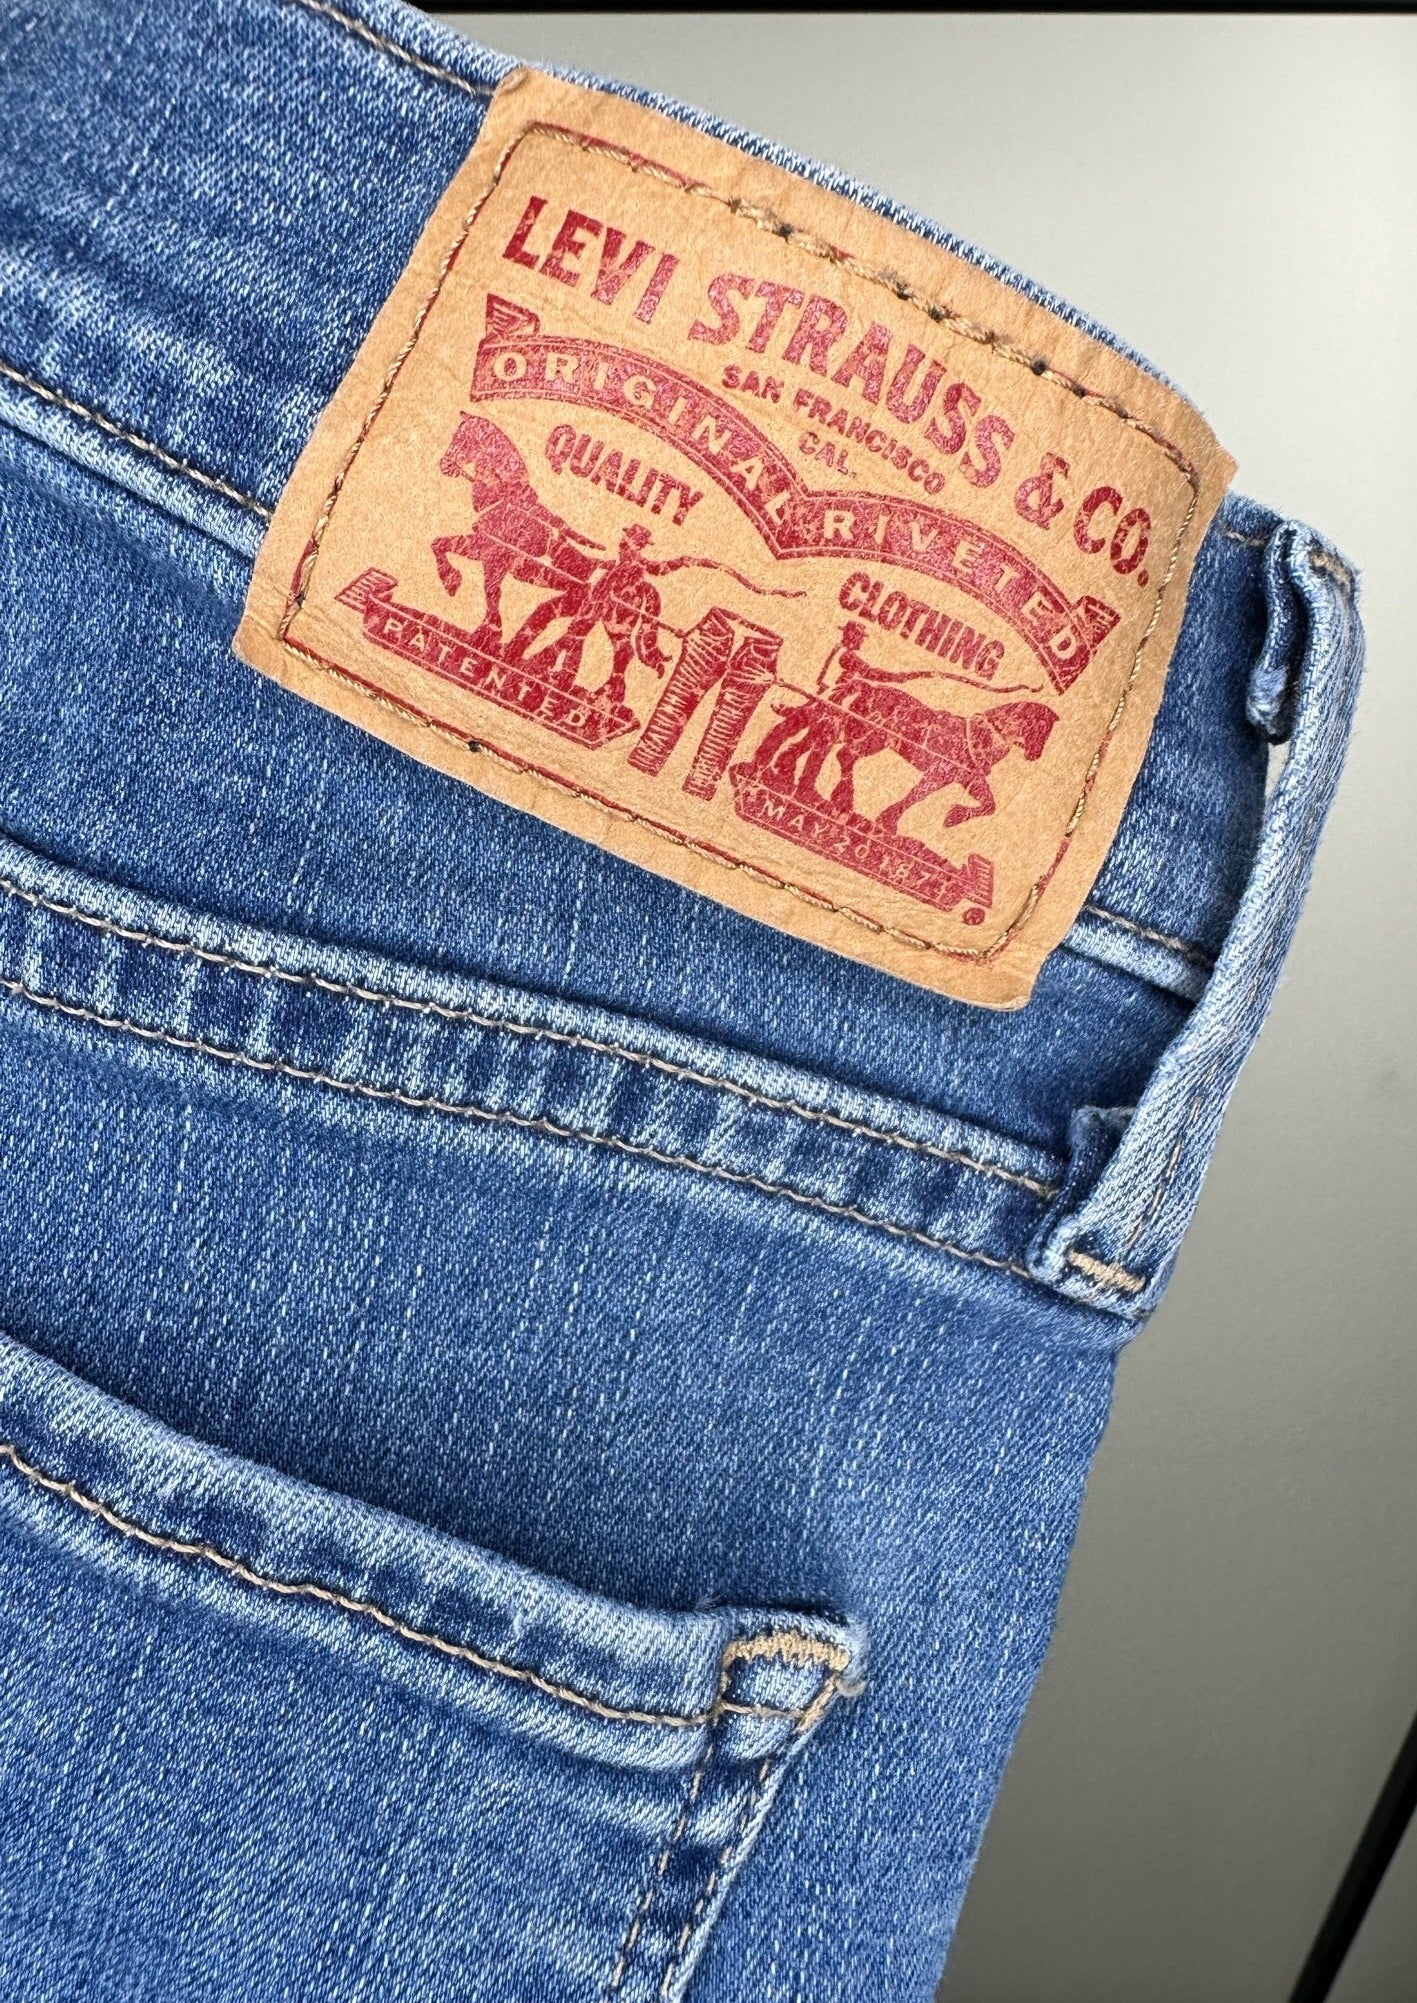 High Rise Super Skinny Jeans By Levi Strauss